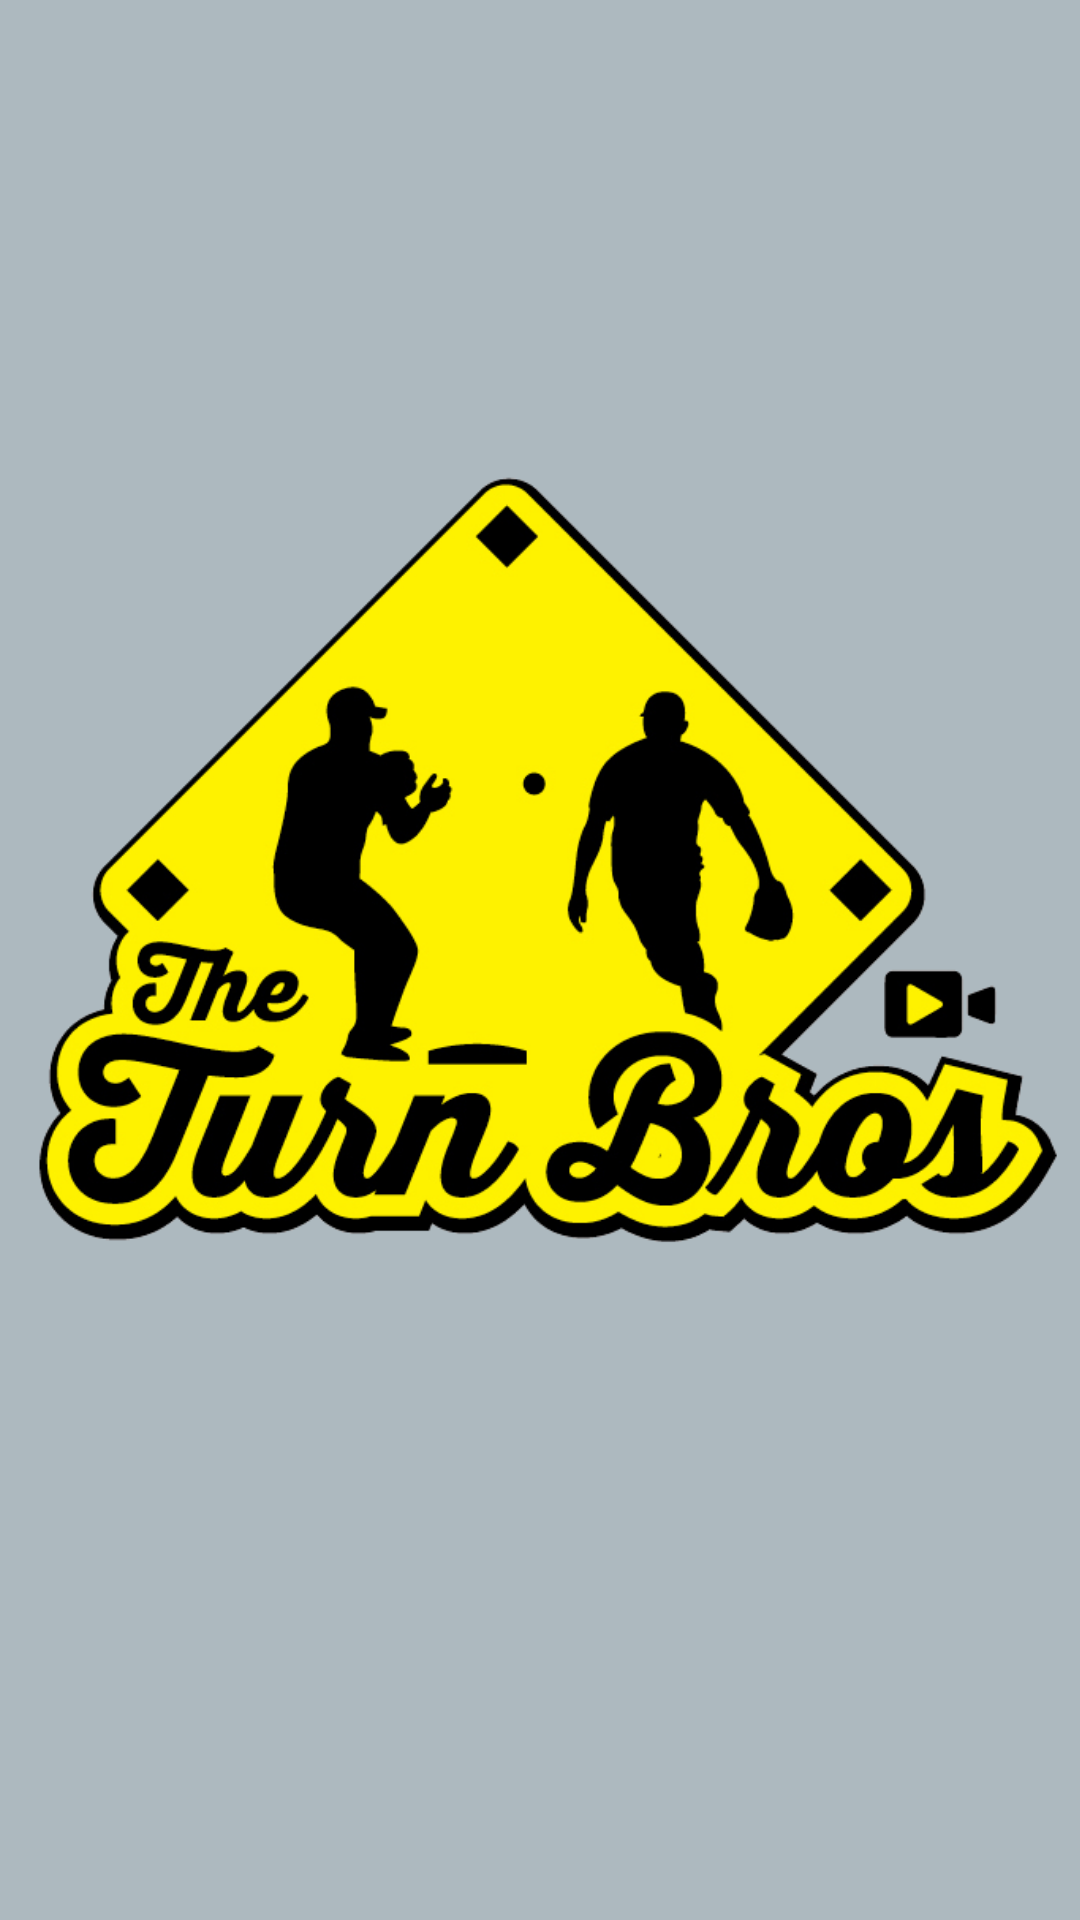 Wallpaper Wednesday - The Turn Bros